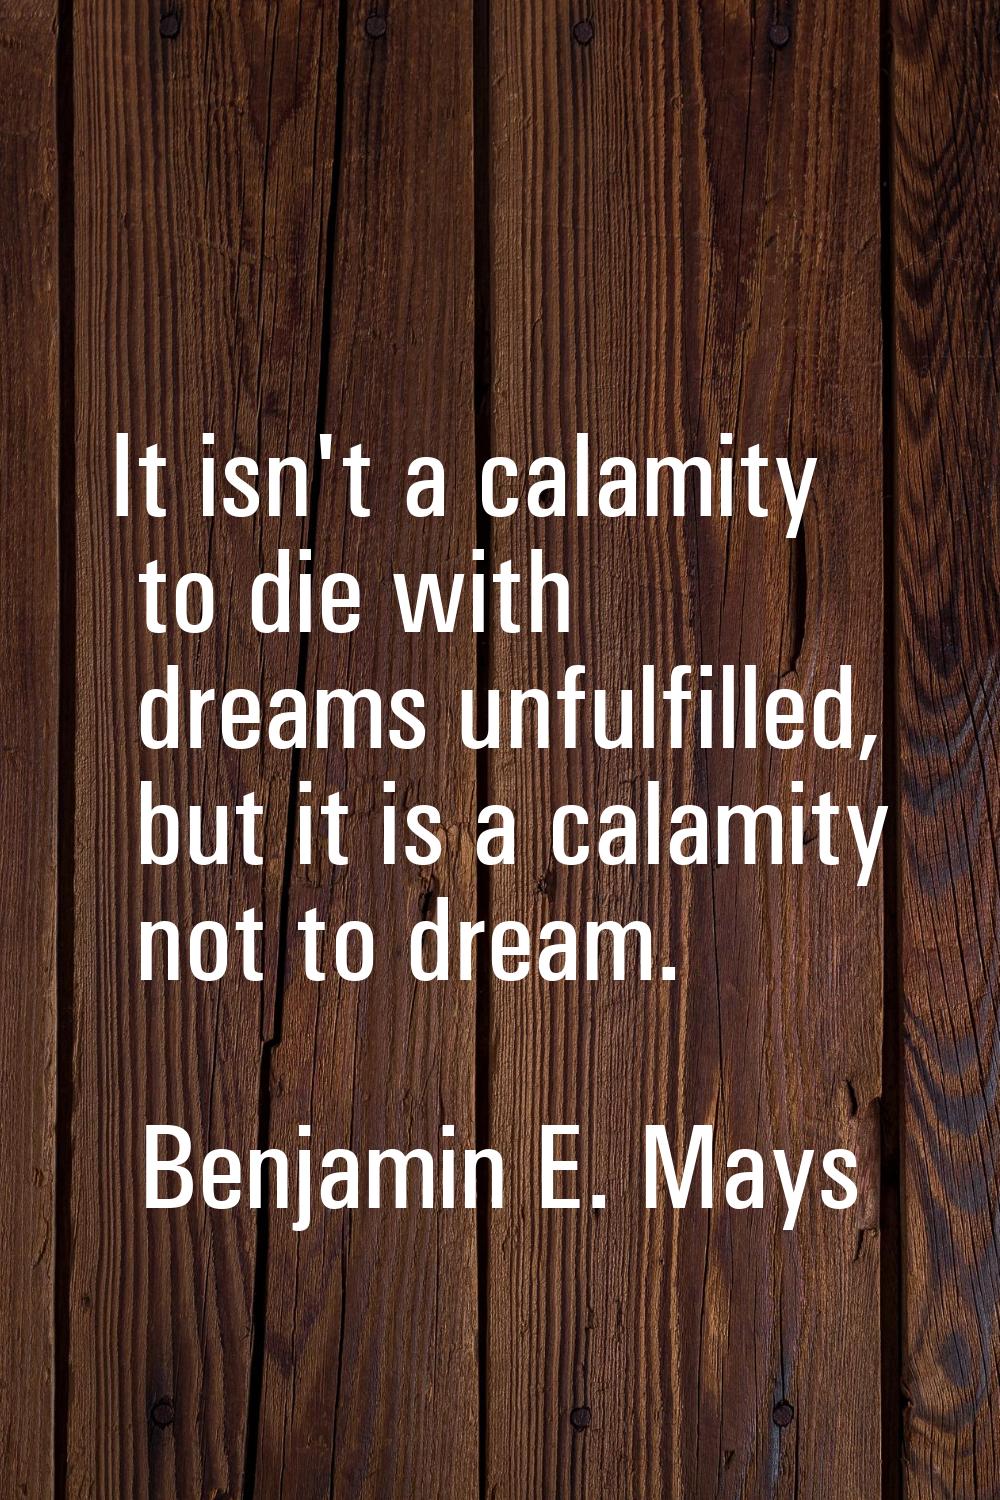 It isn't a calamity to die with dreams unfulfilled, but it is a calamity not to dream.